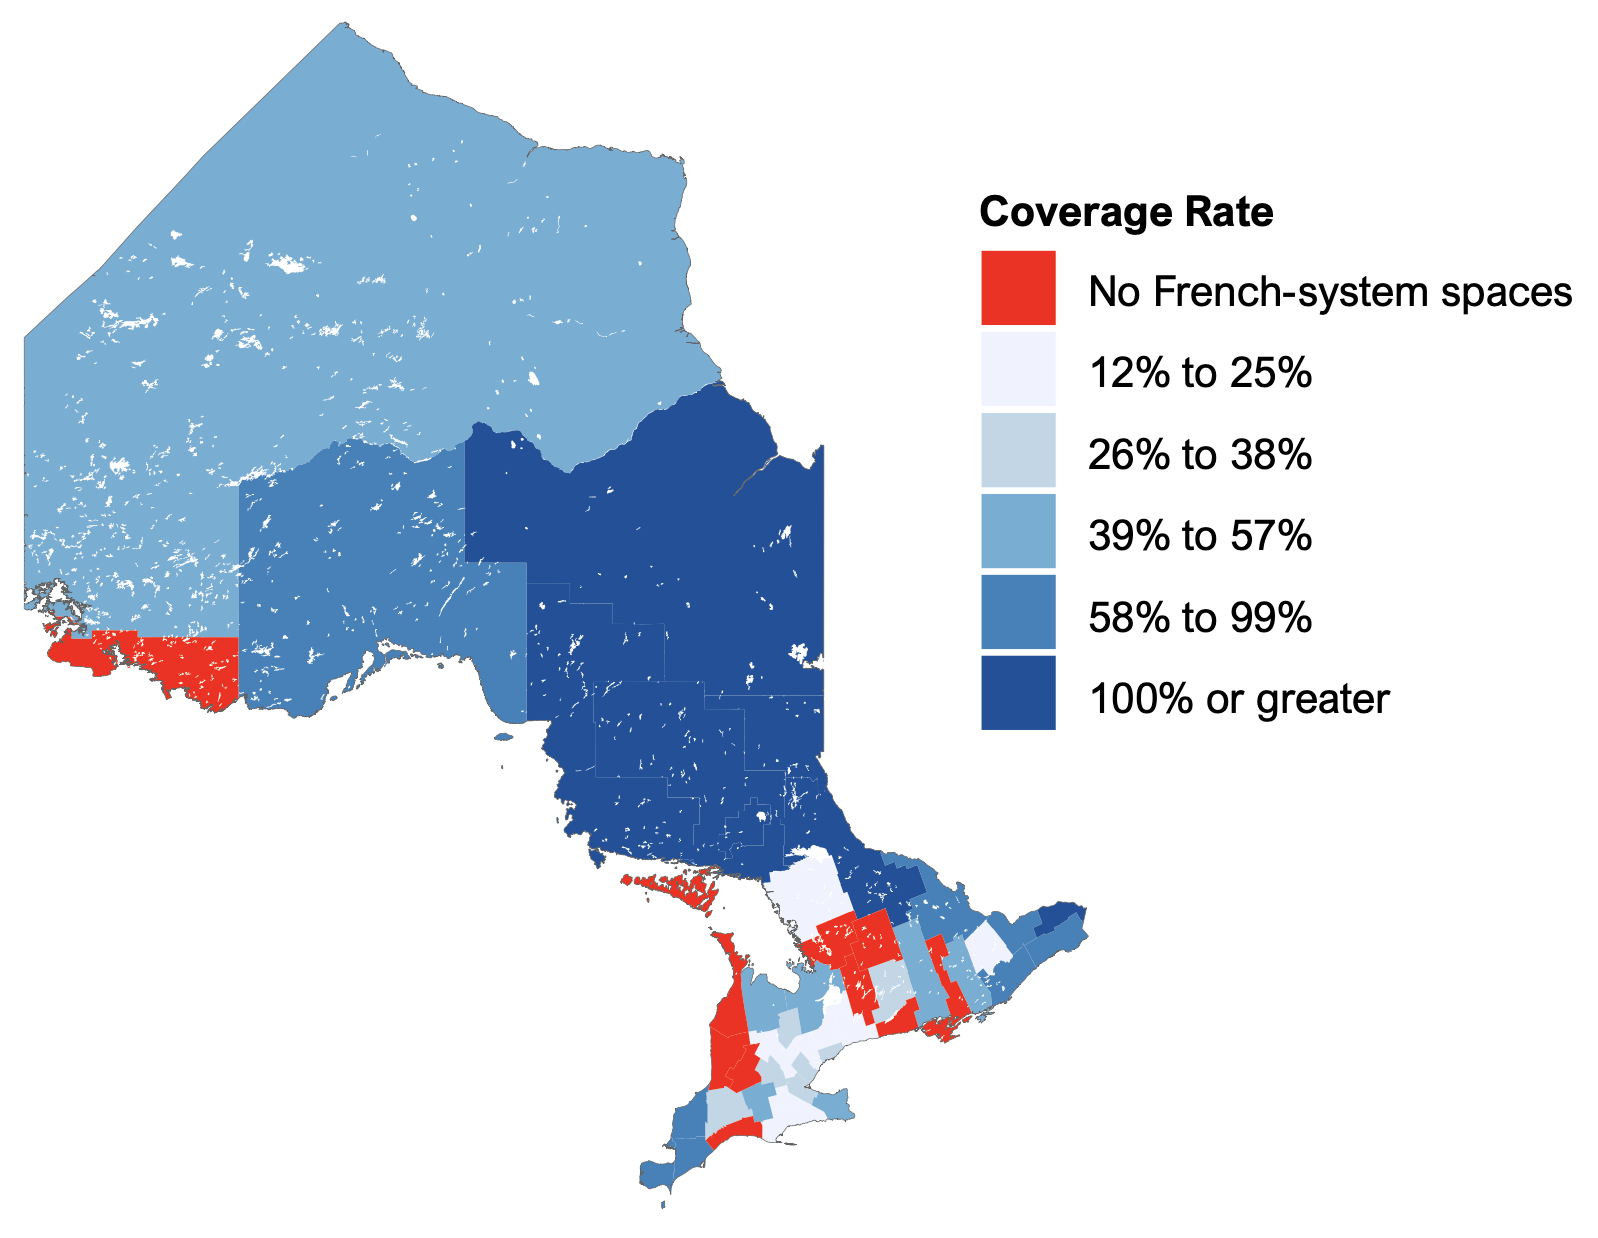 Figure 3.5 show the coverage rates for French-language school system spaces by census division for the 2021-22 school year. Of the Province’s 49 census division, 30 have a French-language rights-holder coverage ratio below 50 per cent, including 12 census divisions with no French-language schools at all. Most of these census divisions without French-language schools are in the Muskoka-Kawarthas and Stratford-Bruce Peninsula regions